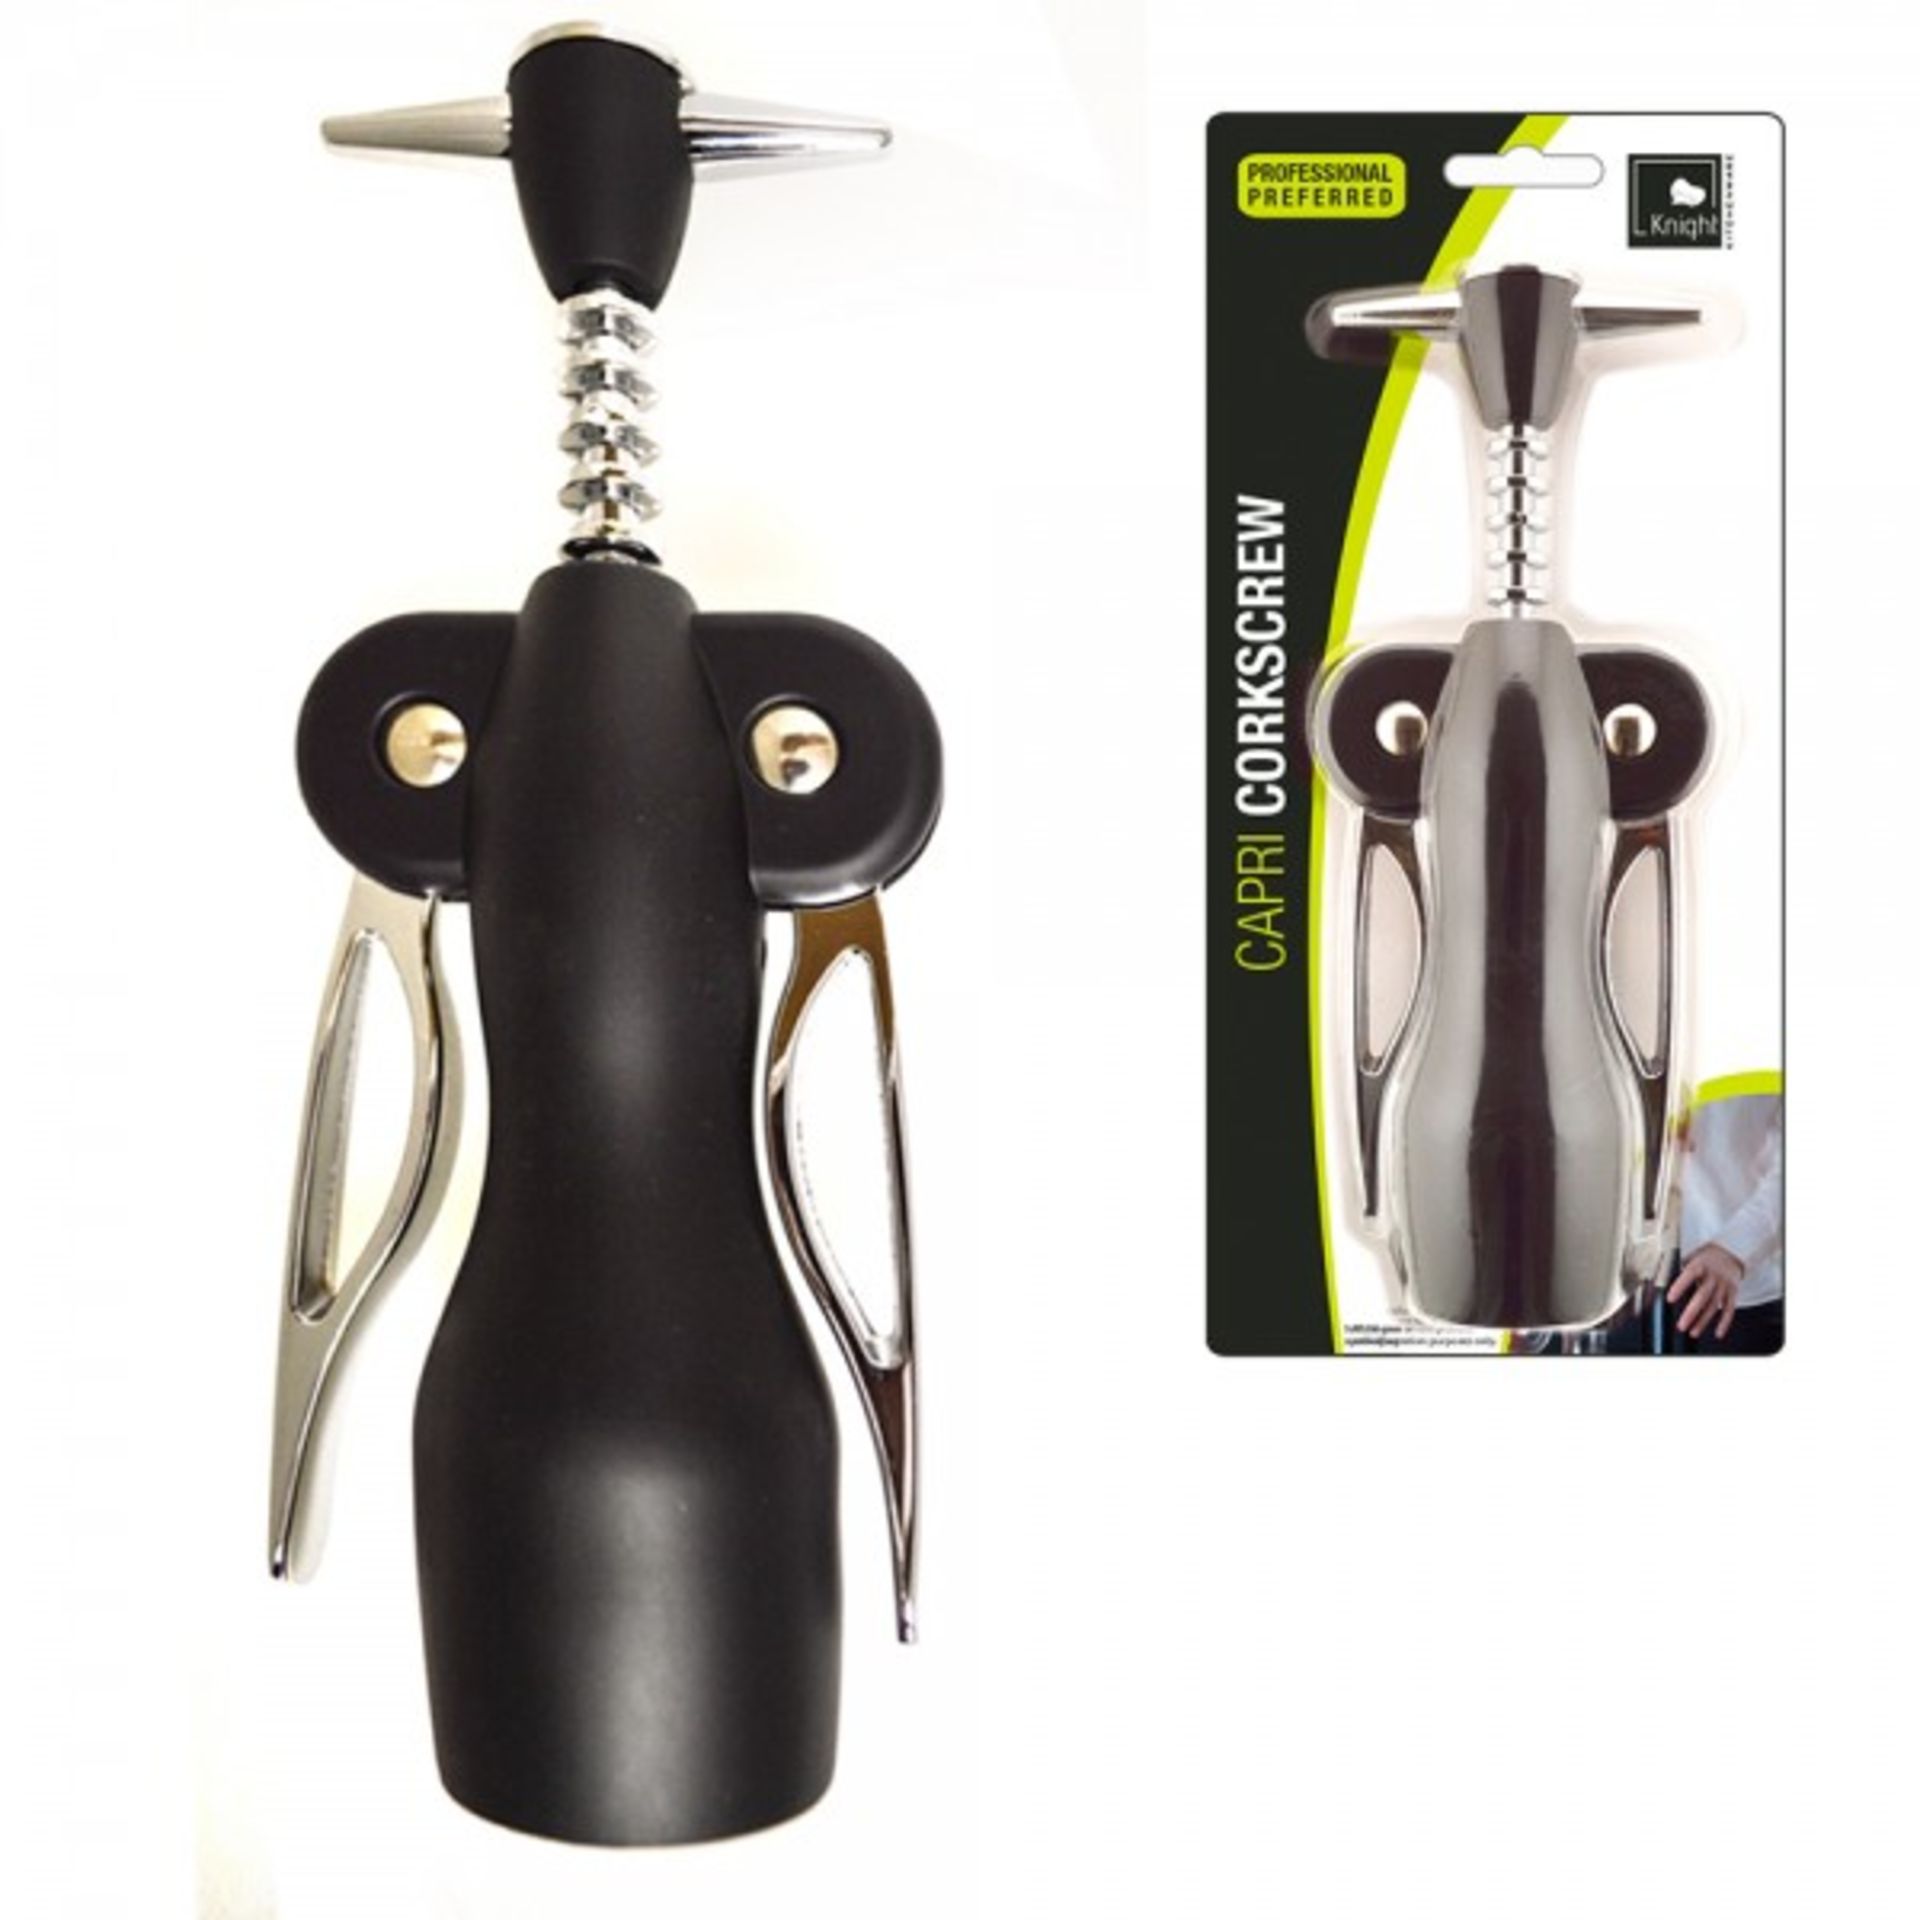 V *TRADE QTY* Brand New Capri Corkscrew Wine Bottle Opener X 3 YOUR BID PRICE TO BE MULTIPLIED BY